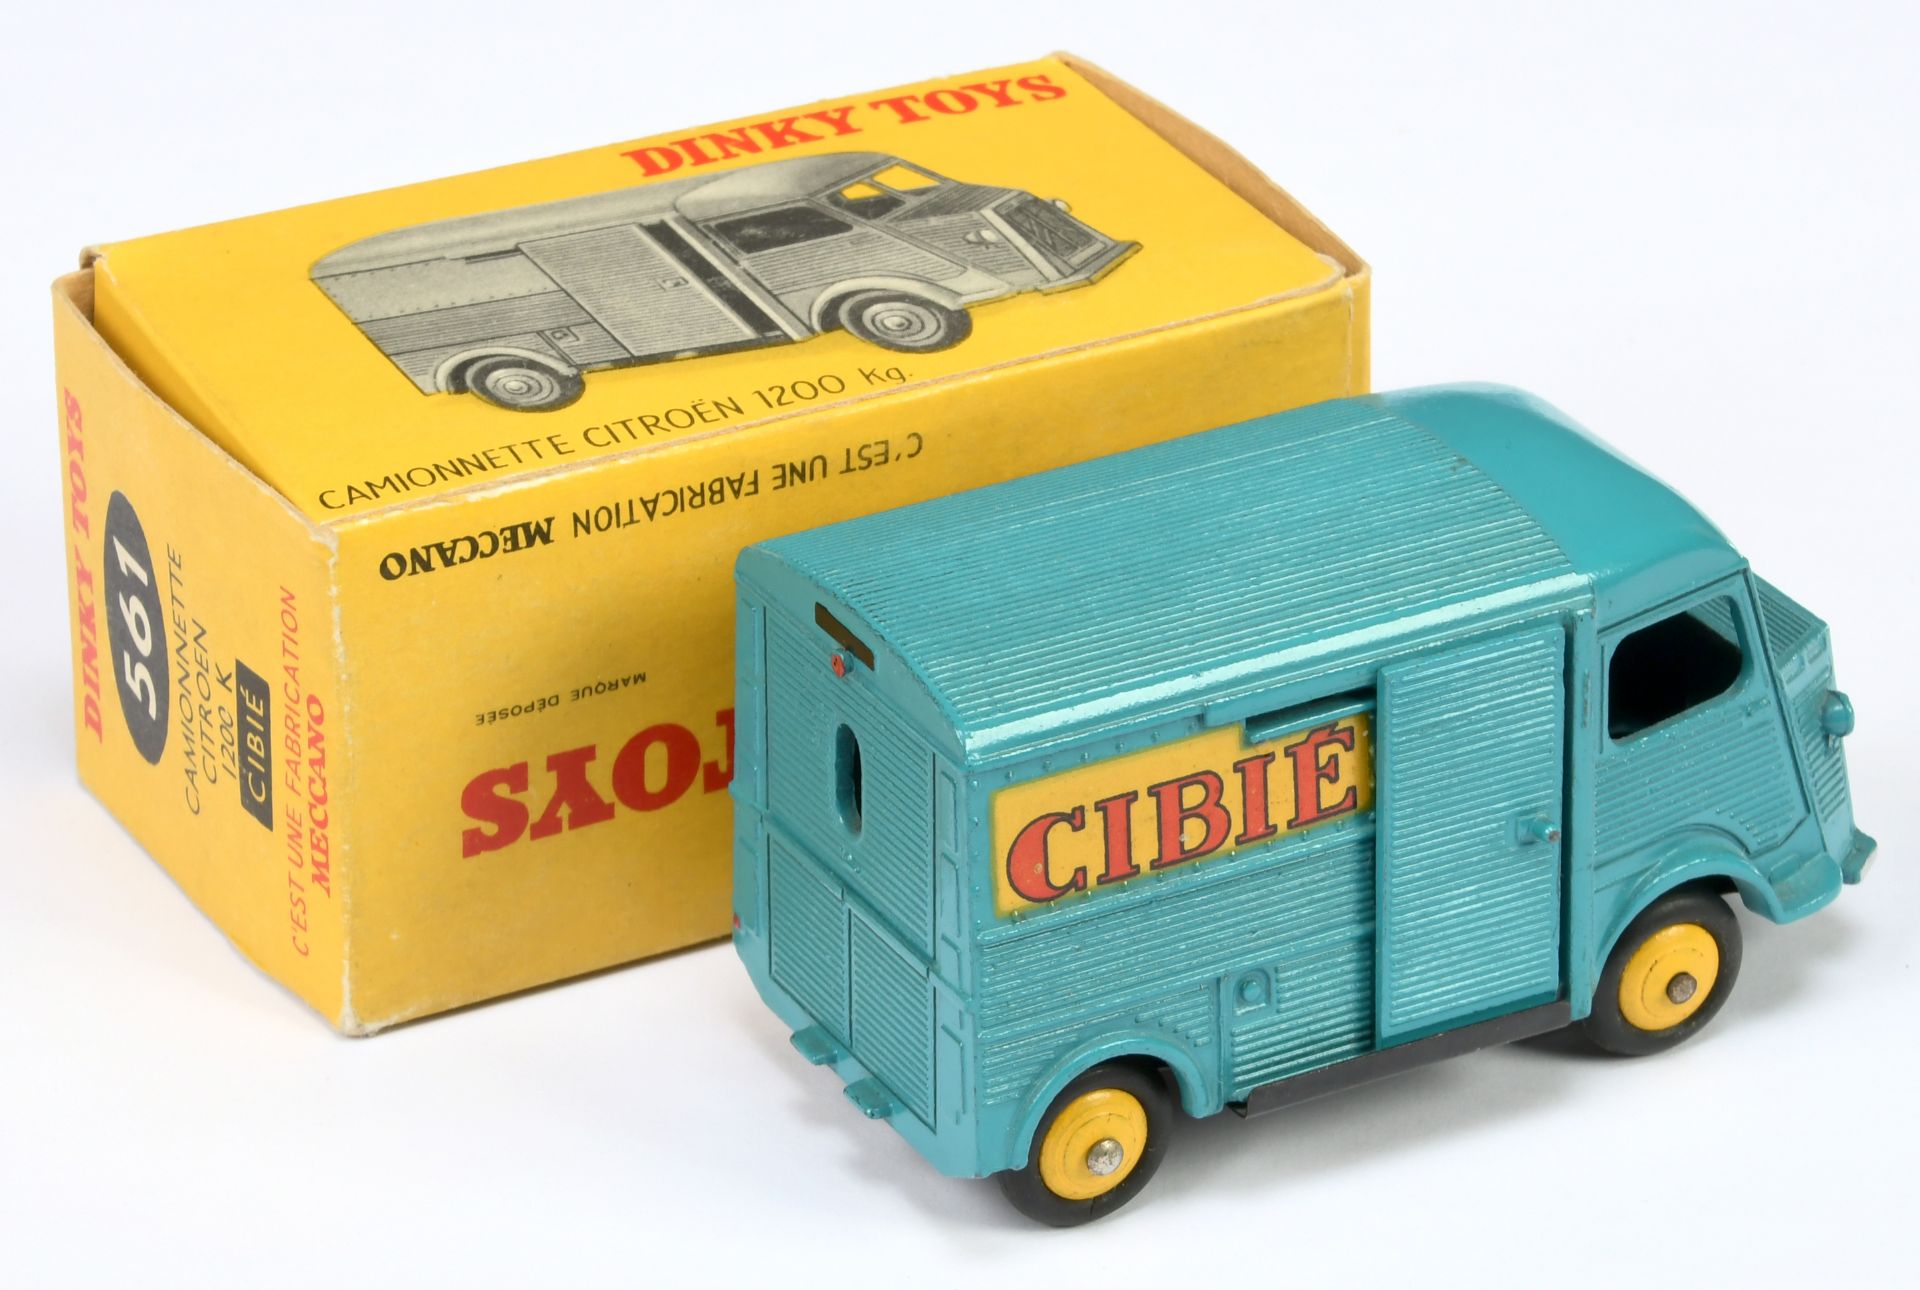 French Dinky Toys 561 Citroen Type H Van "Cibie" - Deep turquoise, yellow convex hubs, silver trim - Image 2 of 2